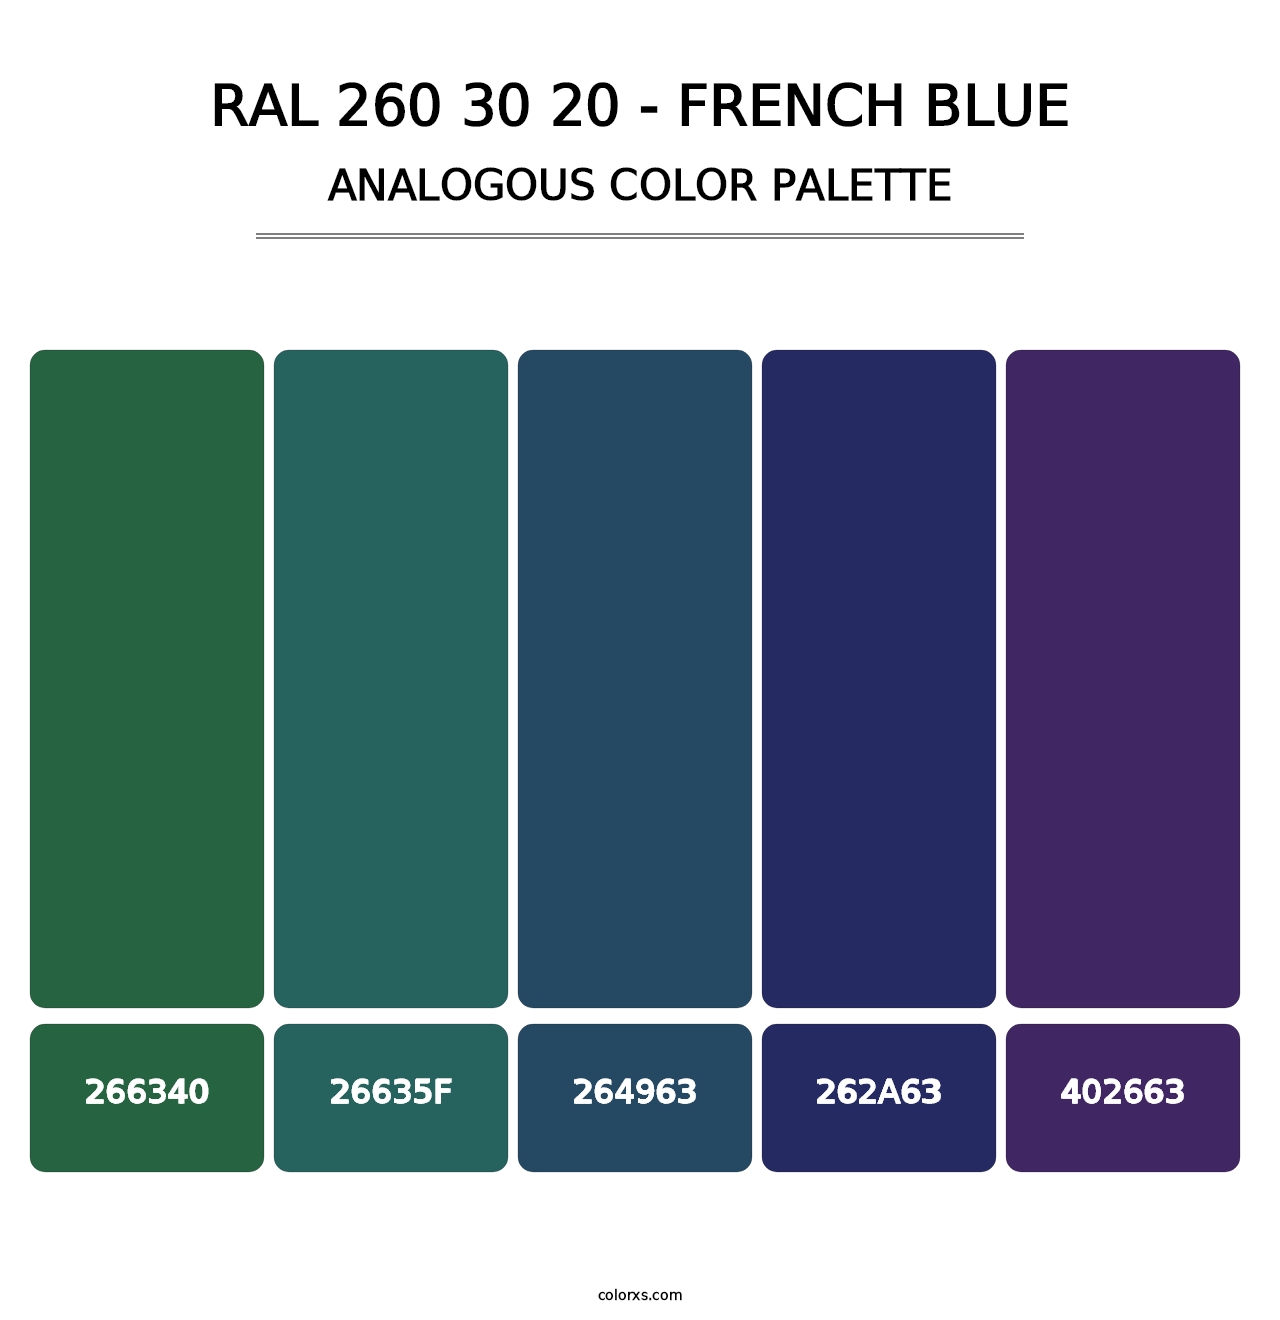 RAL 260 30 20 - French Blue - Analogous Color Palette